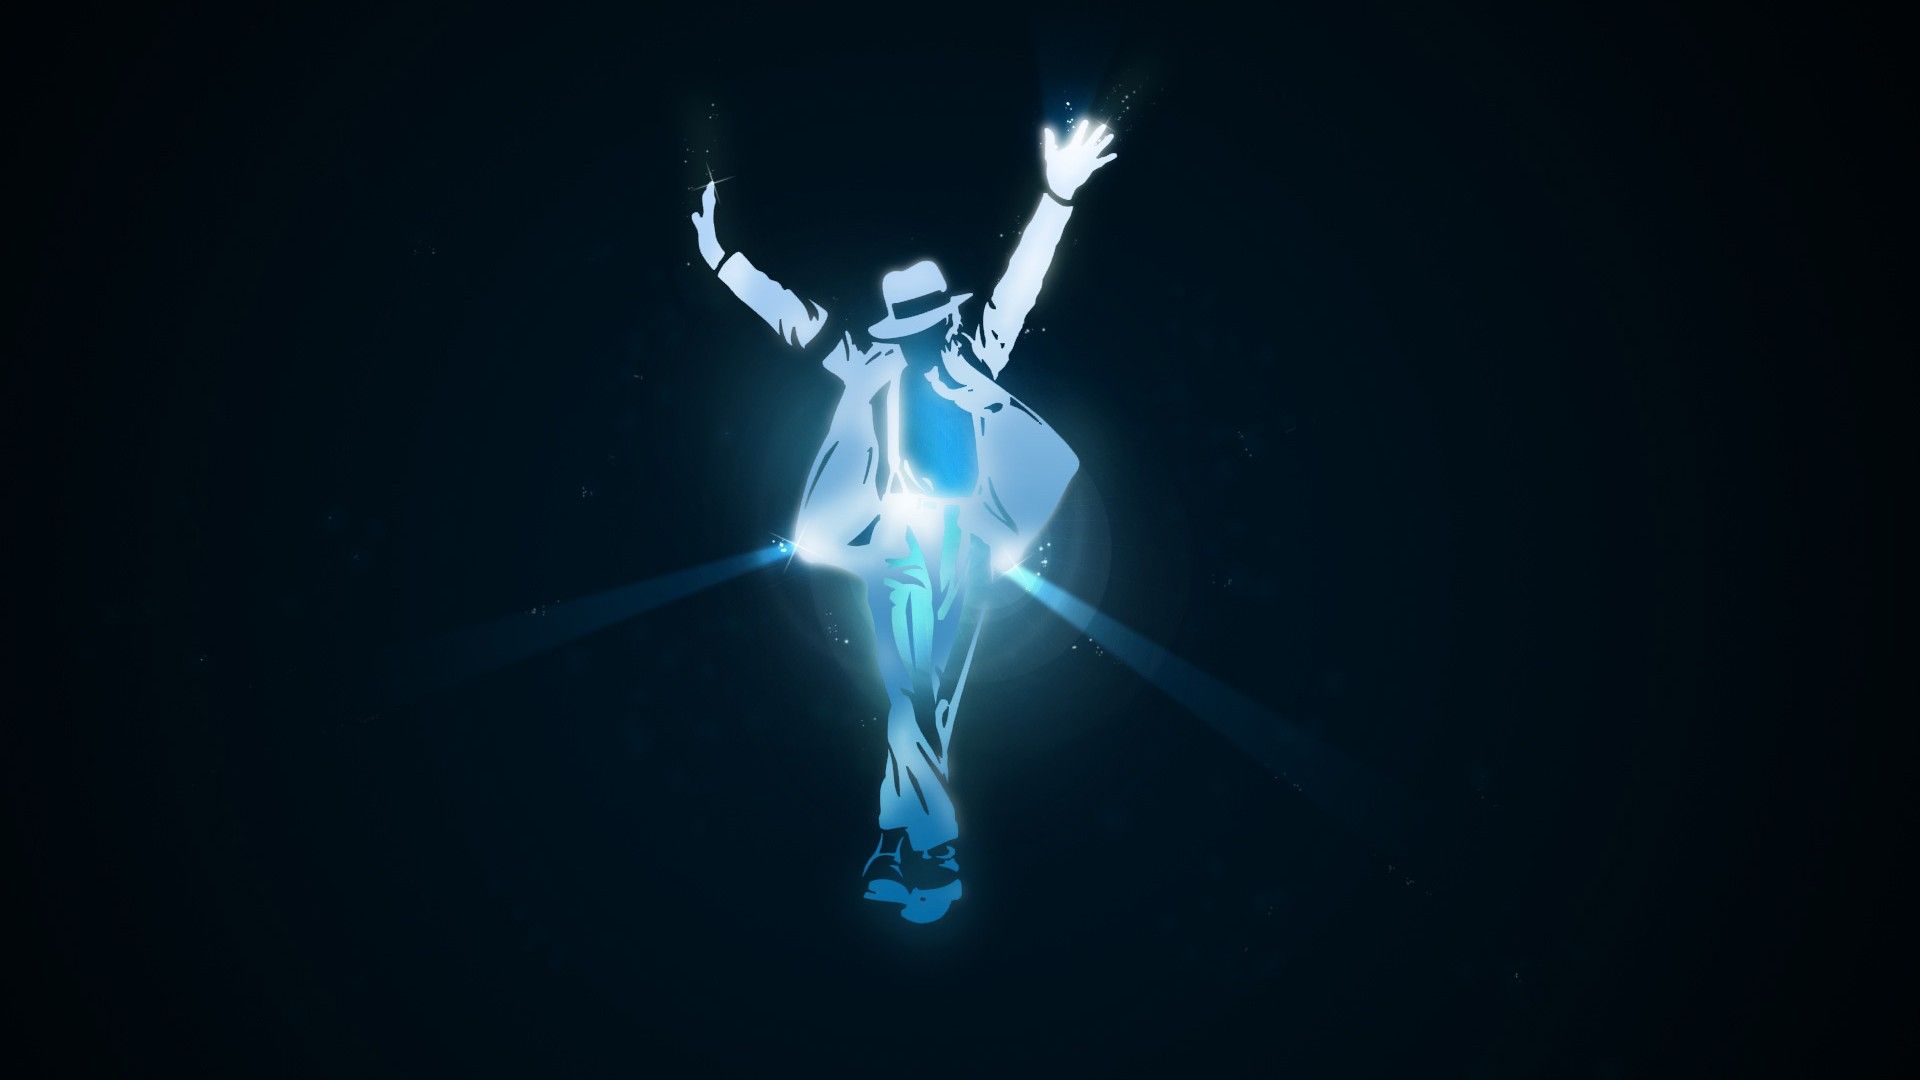 michael jackson images wallpapers #1